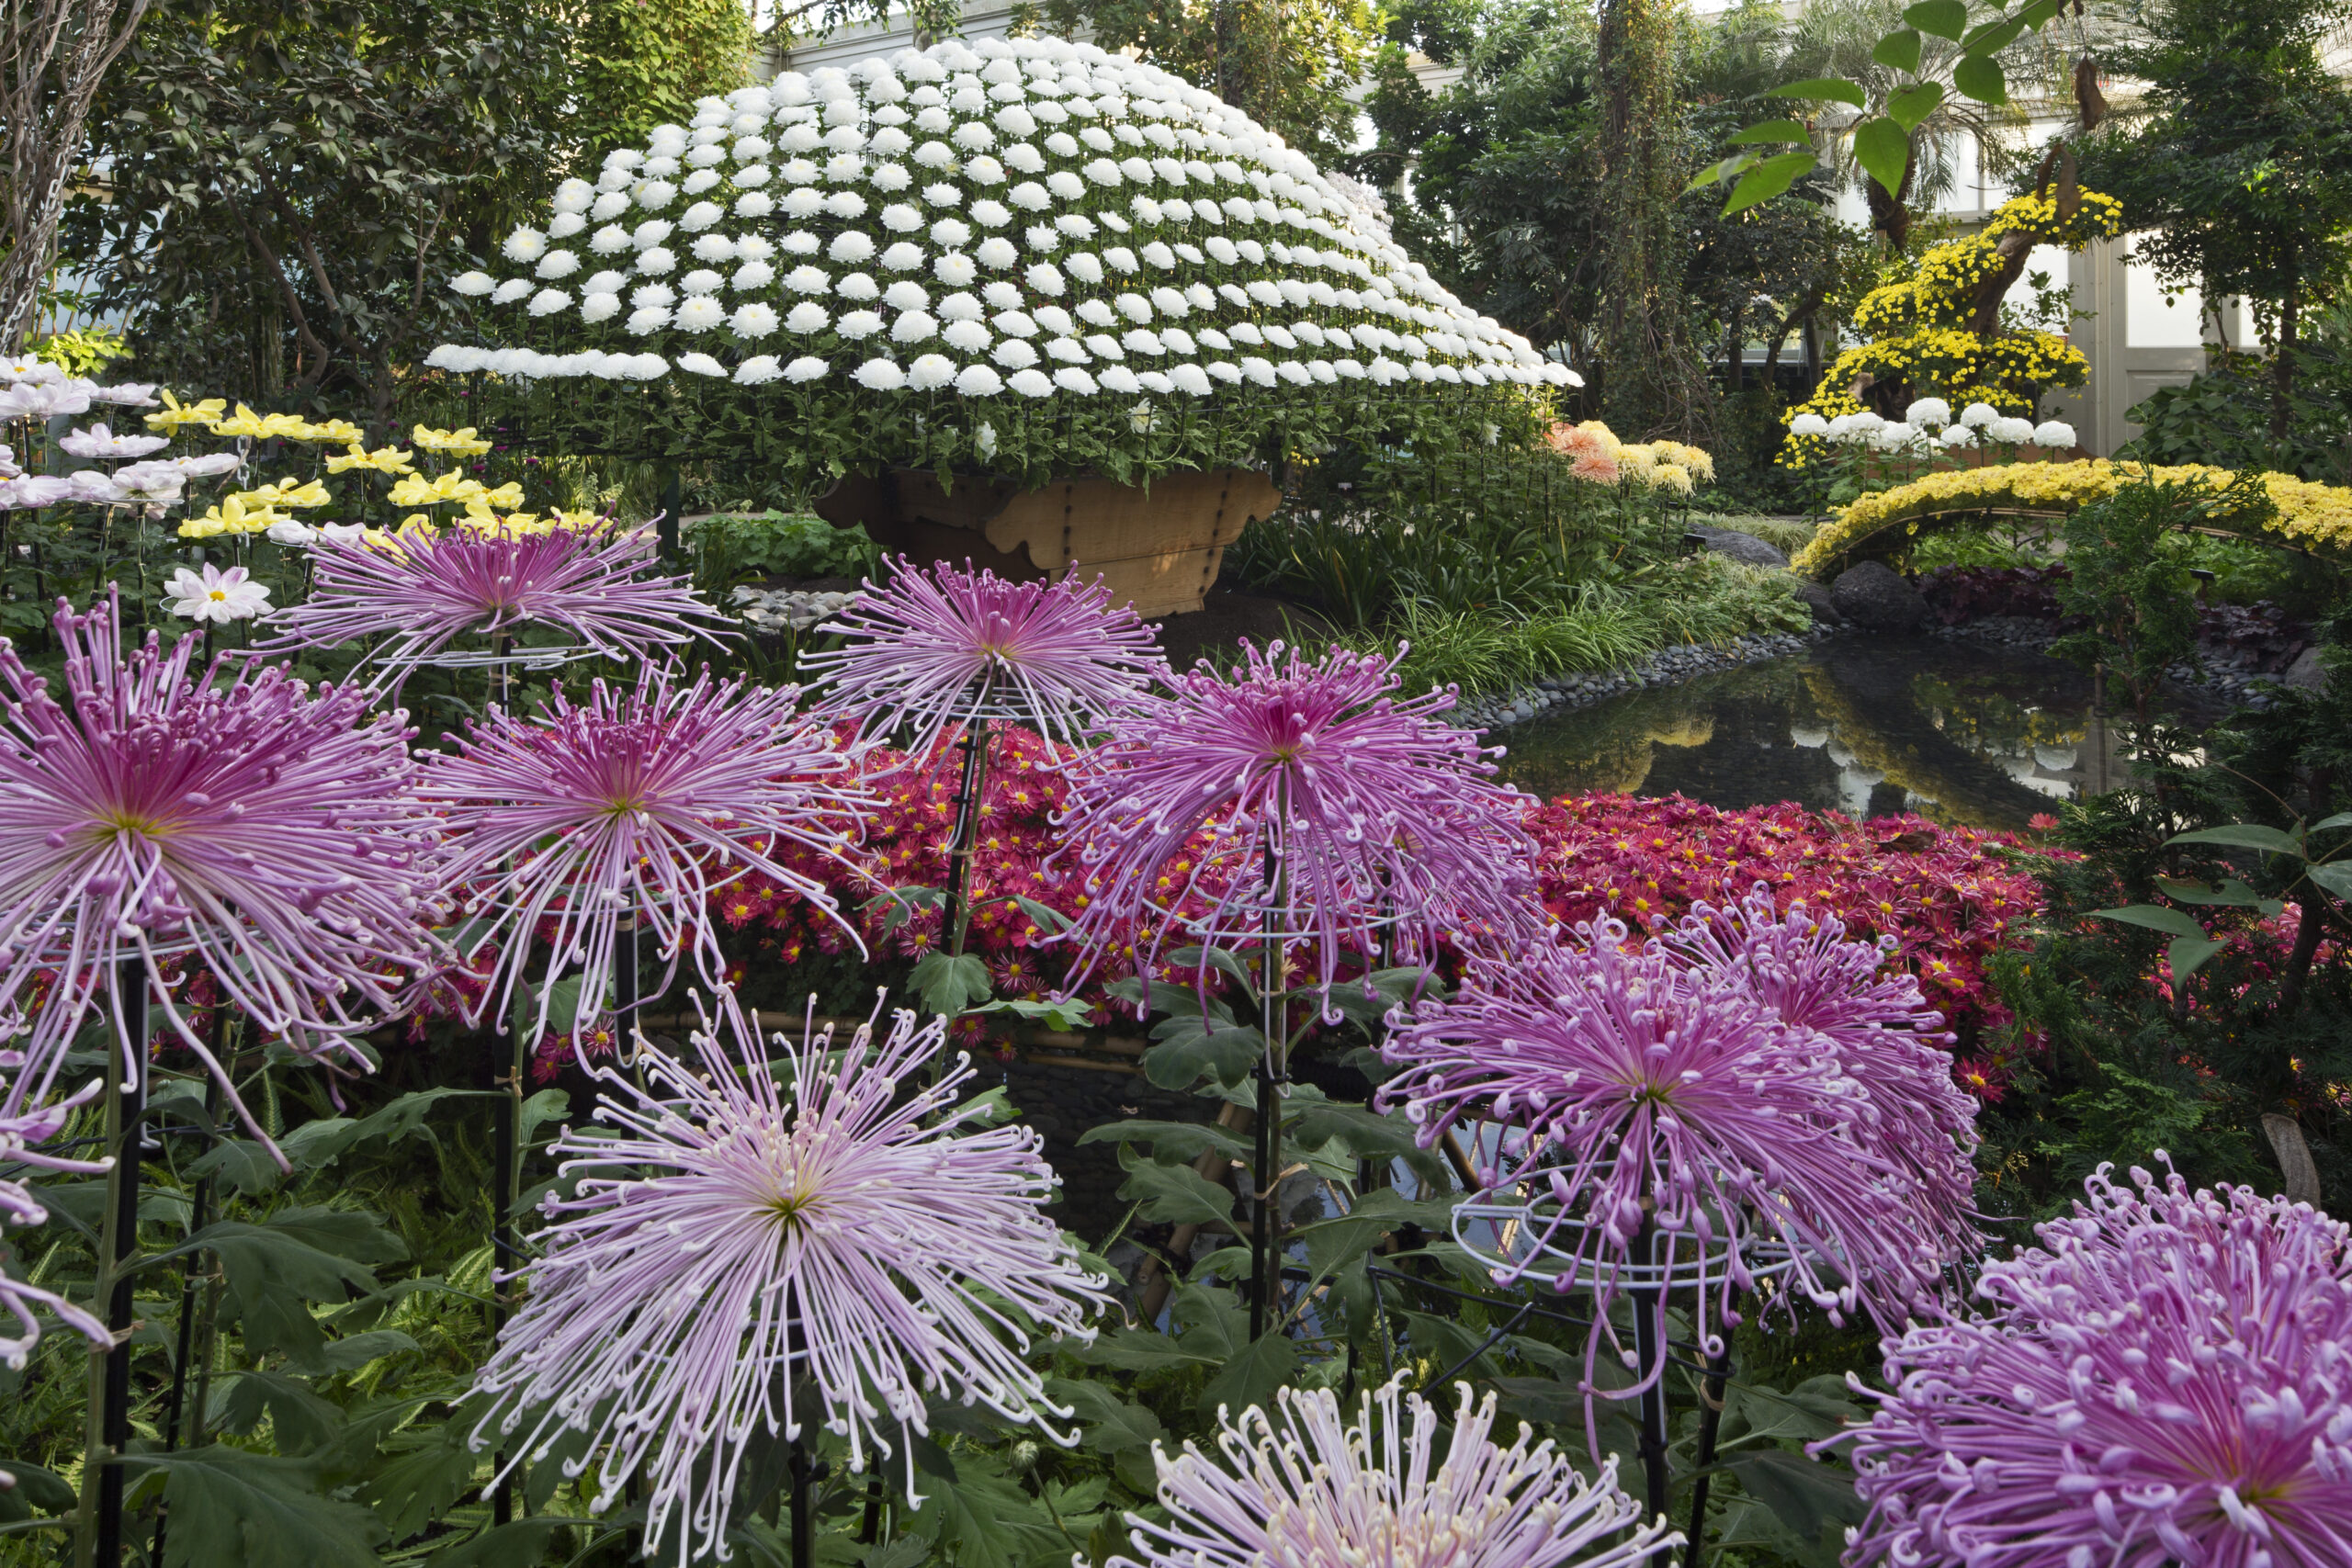 Spider mums and other varieties at the New York Botanical Garden. COURTESY NEW YORK BOTANICAL GARDEN